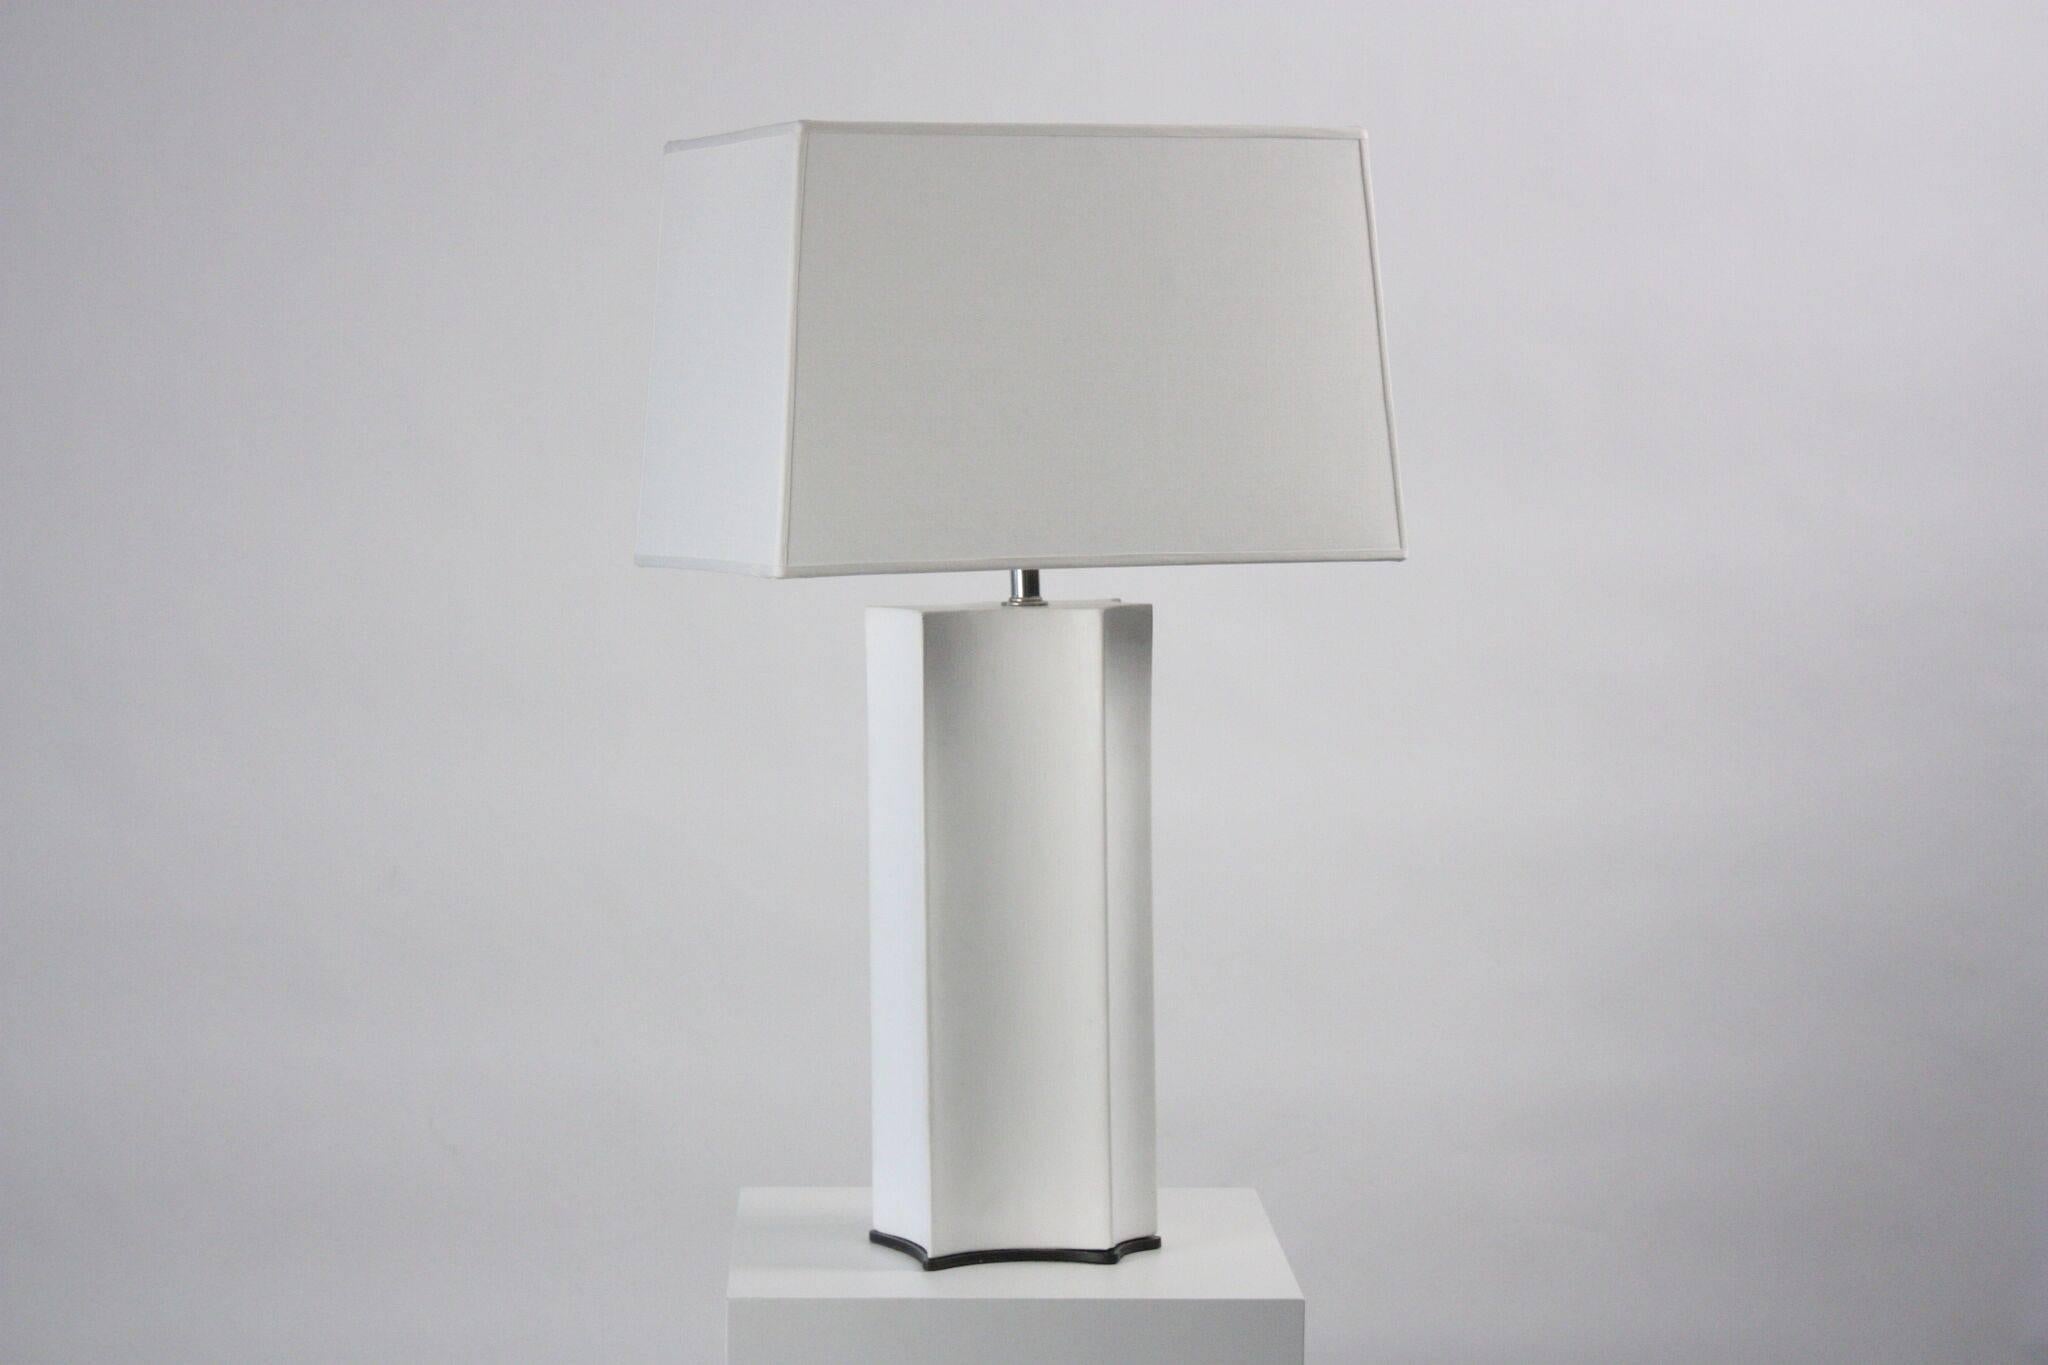 Emily Summers Studio line contemporary, plaster lamp, USA. Plaster, dark steel (shown) and custom shade. 
 
Can be customized with a brass or polished nickel base. 
 
18.5” H x 10” W x 8.5” deep  31.75 tall with shade.

